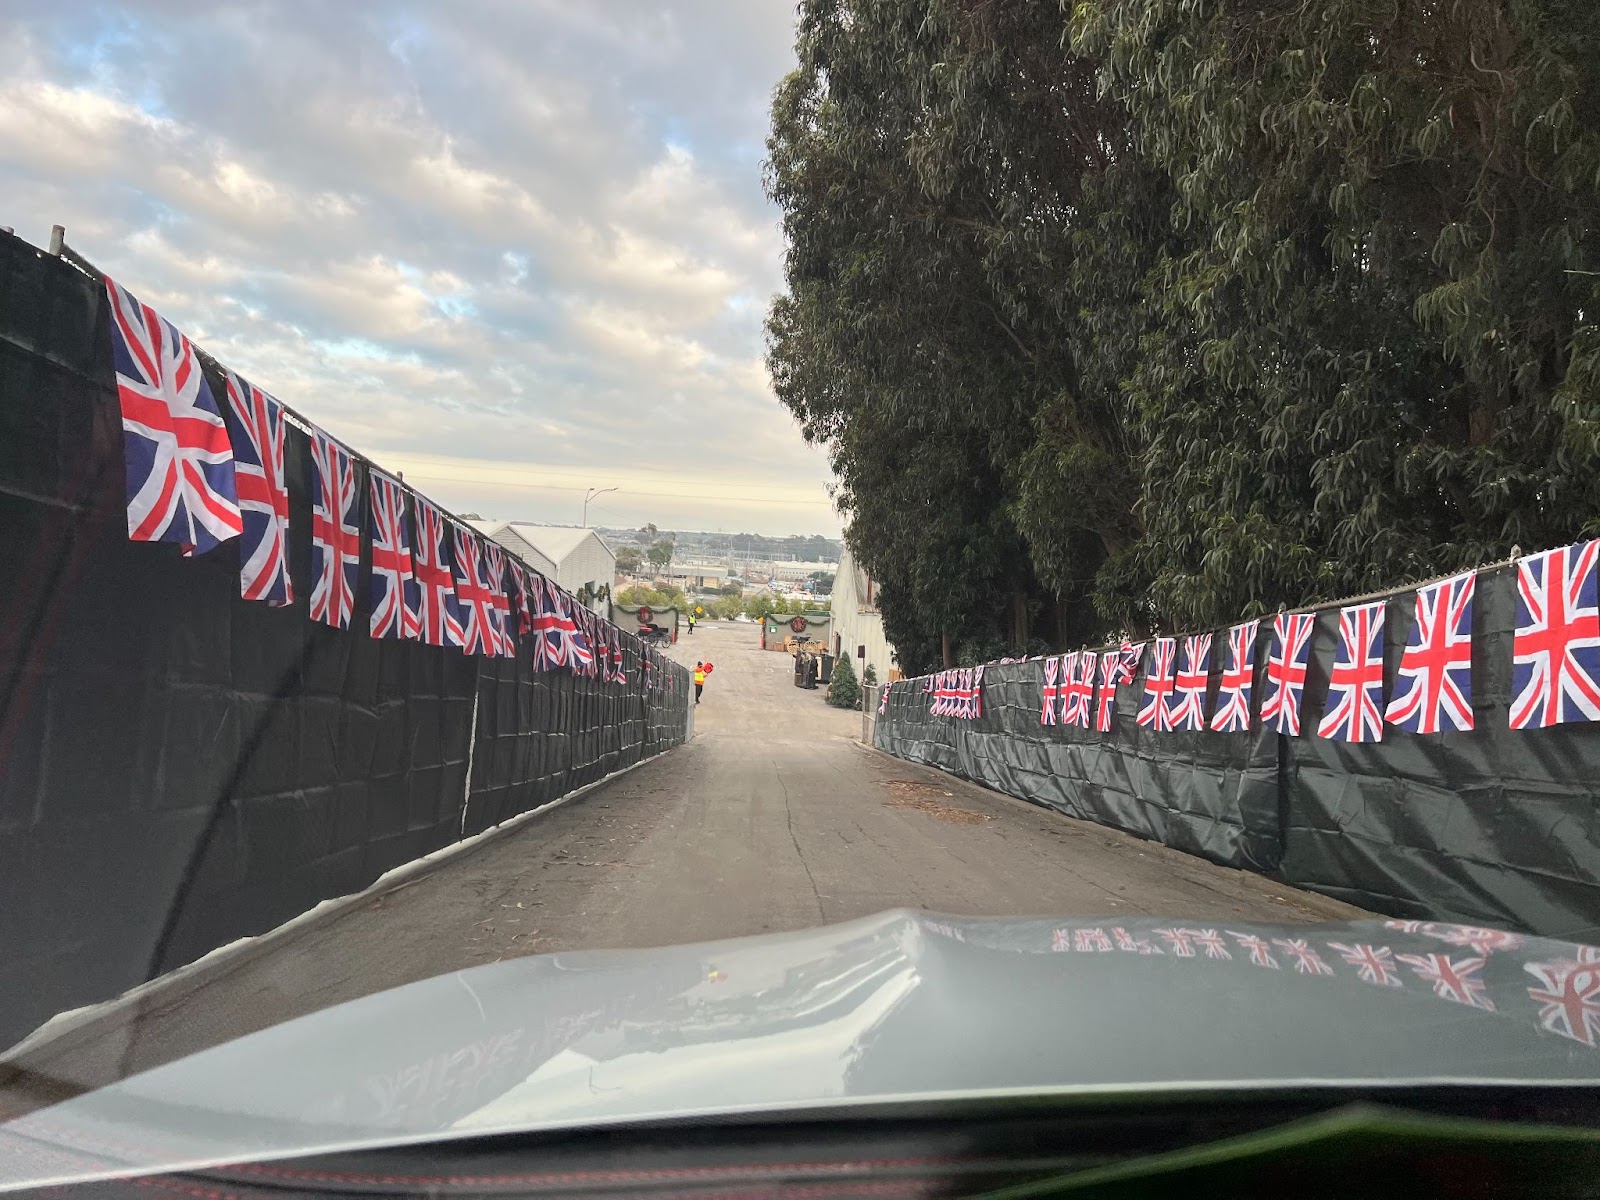 A downward sloped road is lined with British flags. 